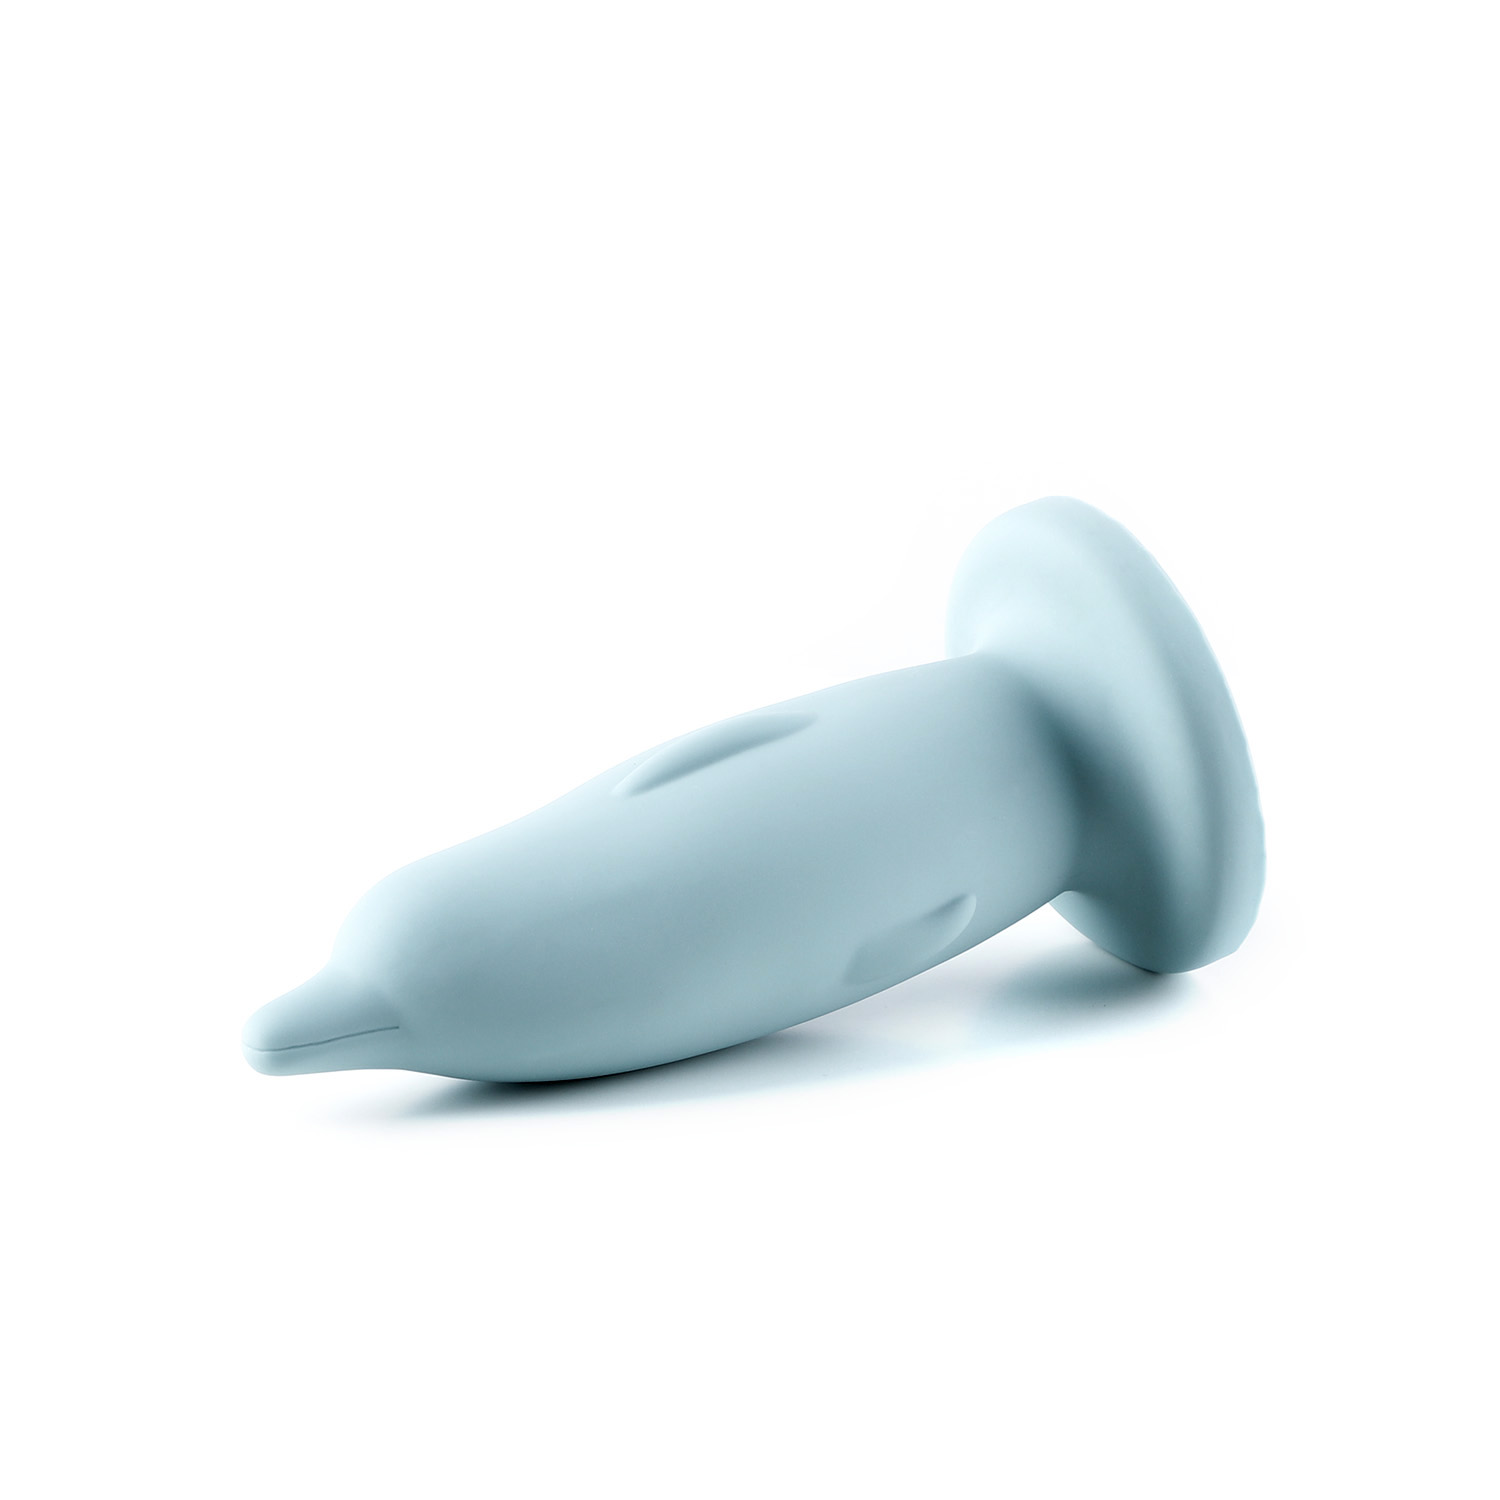 FANTASY DOLPHIN TEXTURED SILICONE DILDO ANAL PLAY IN BULE